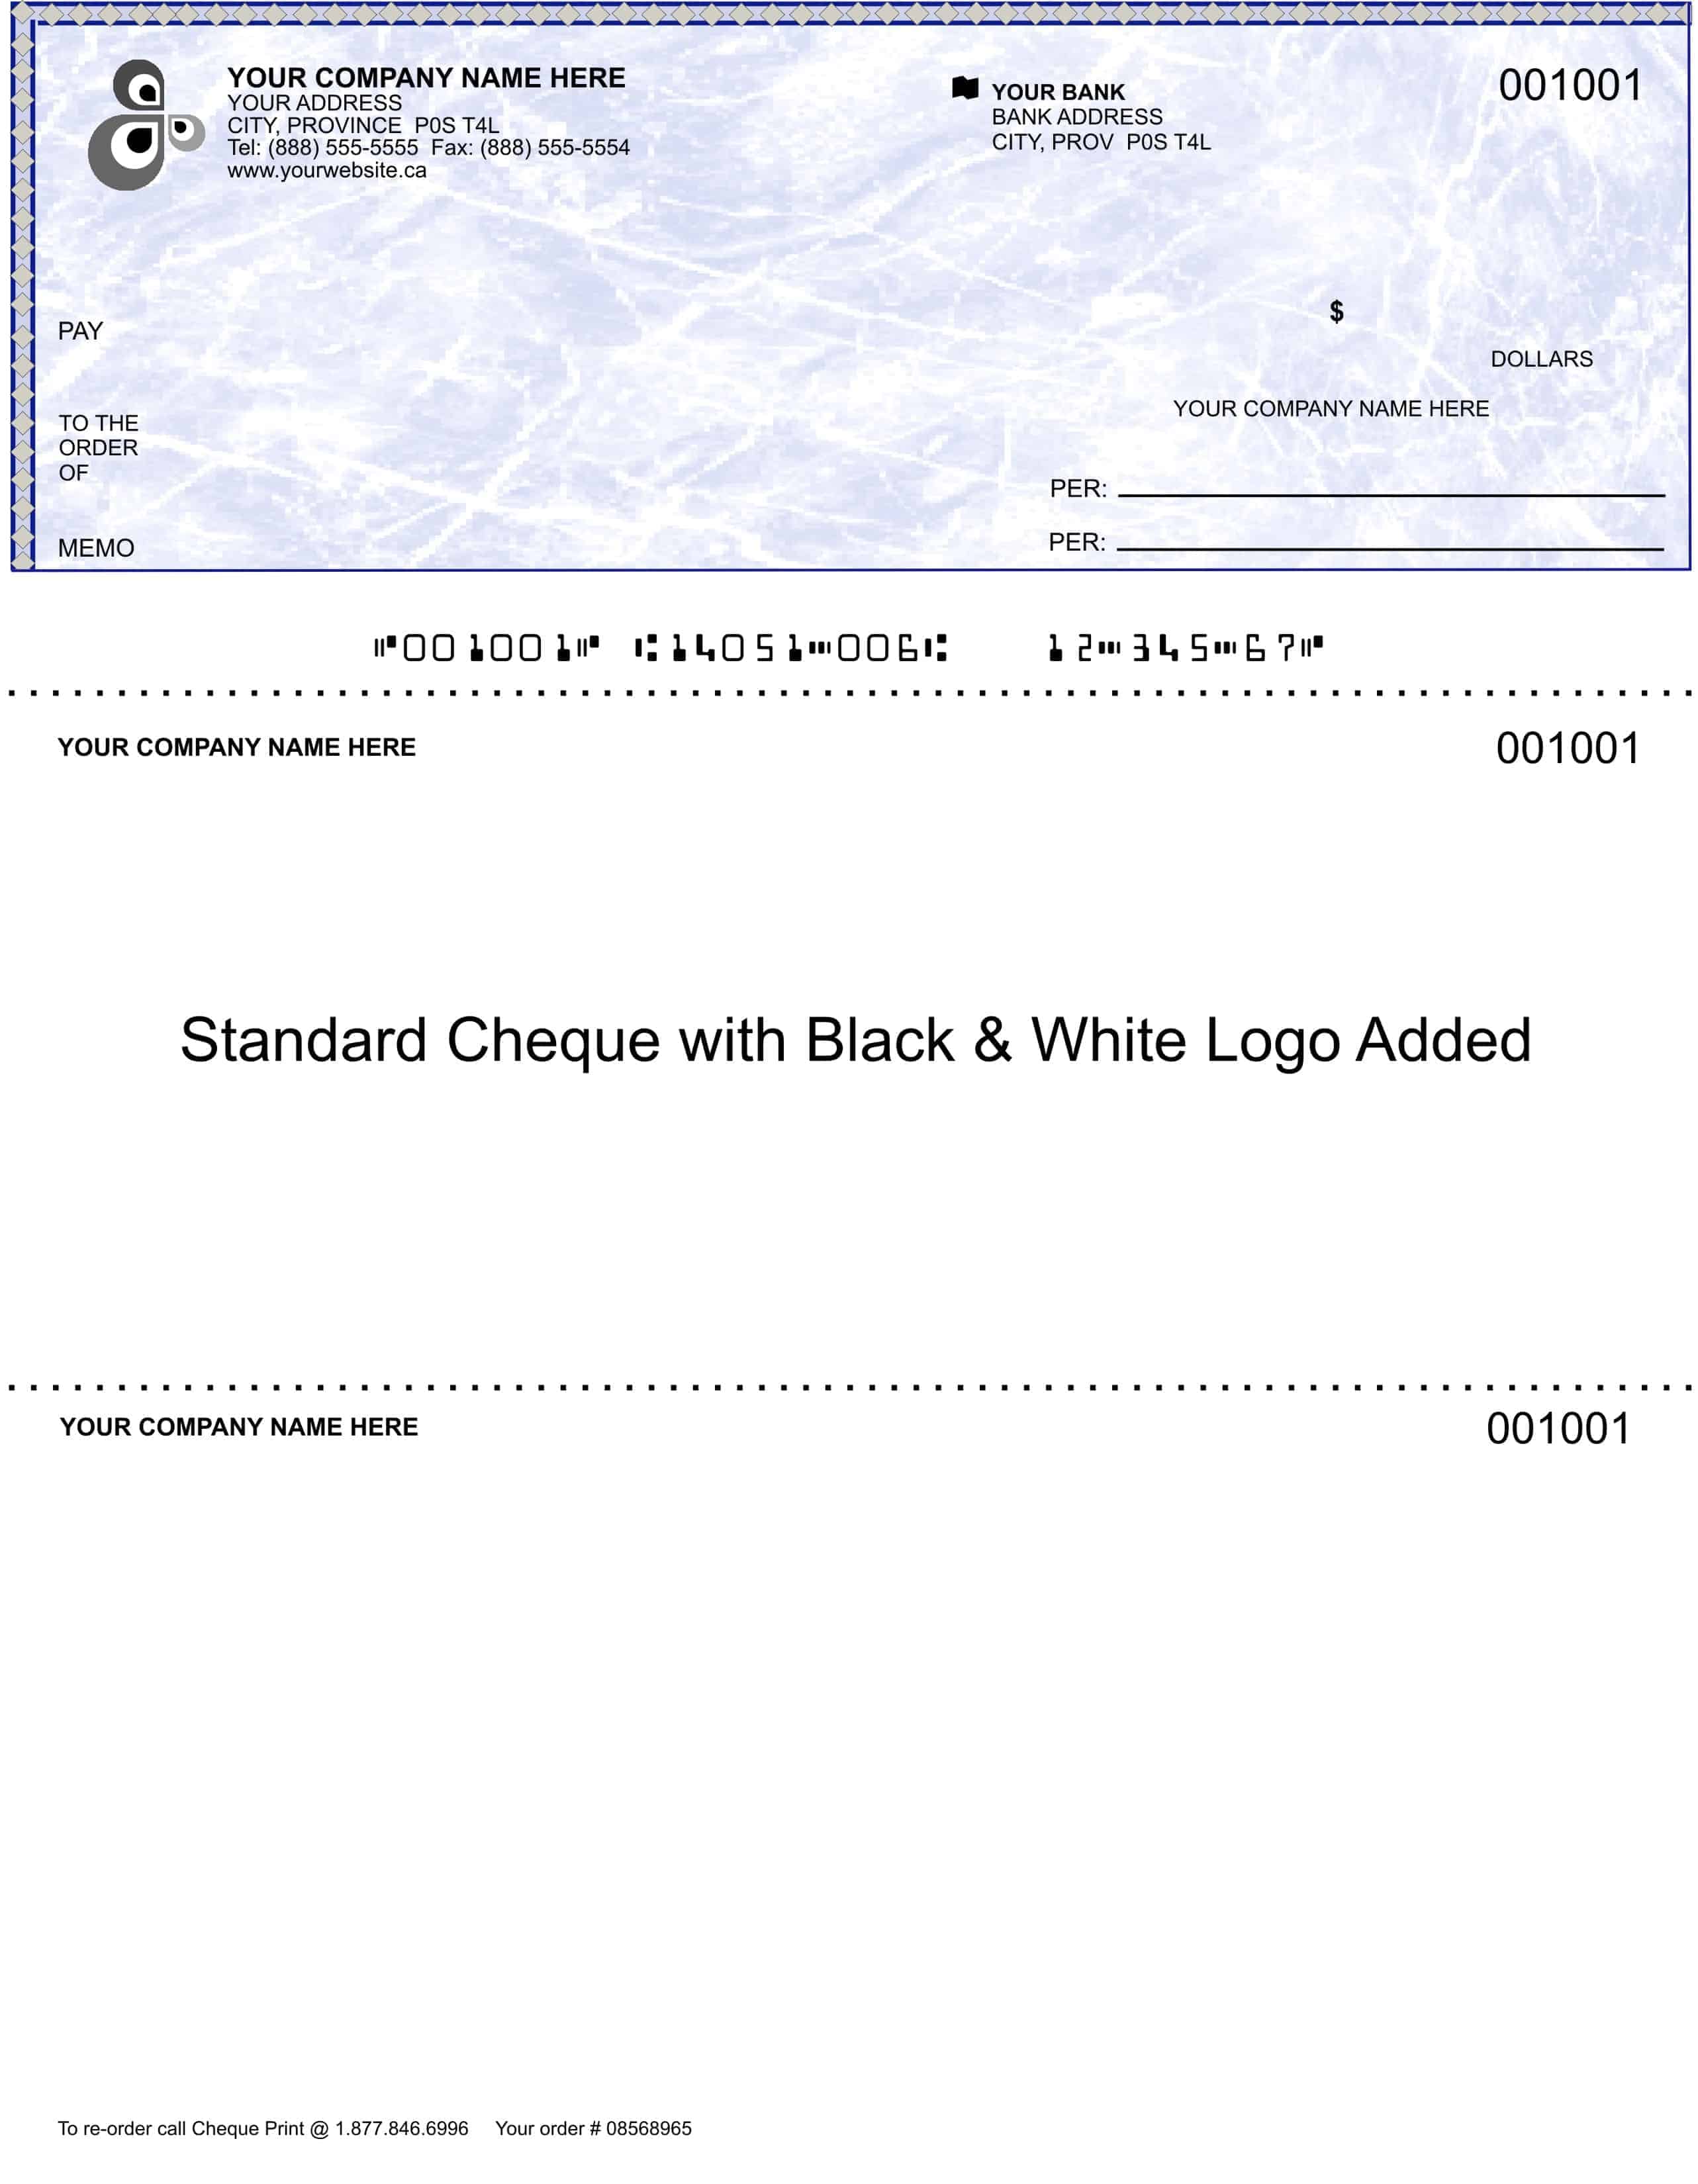 Standard cheque with black and white logo added